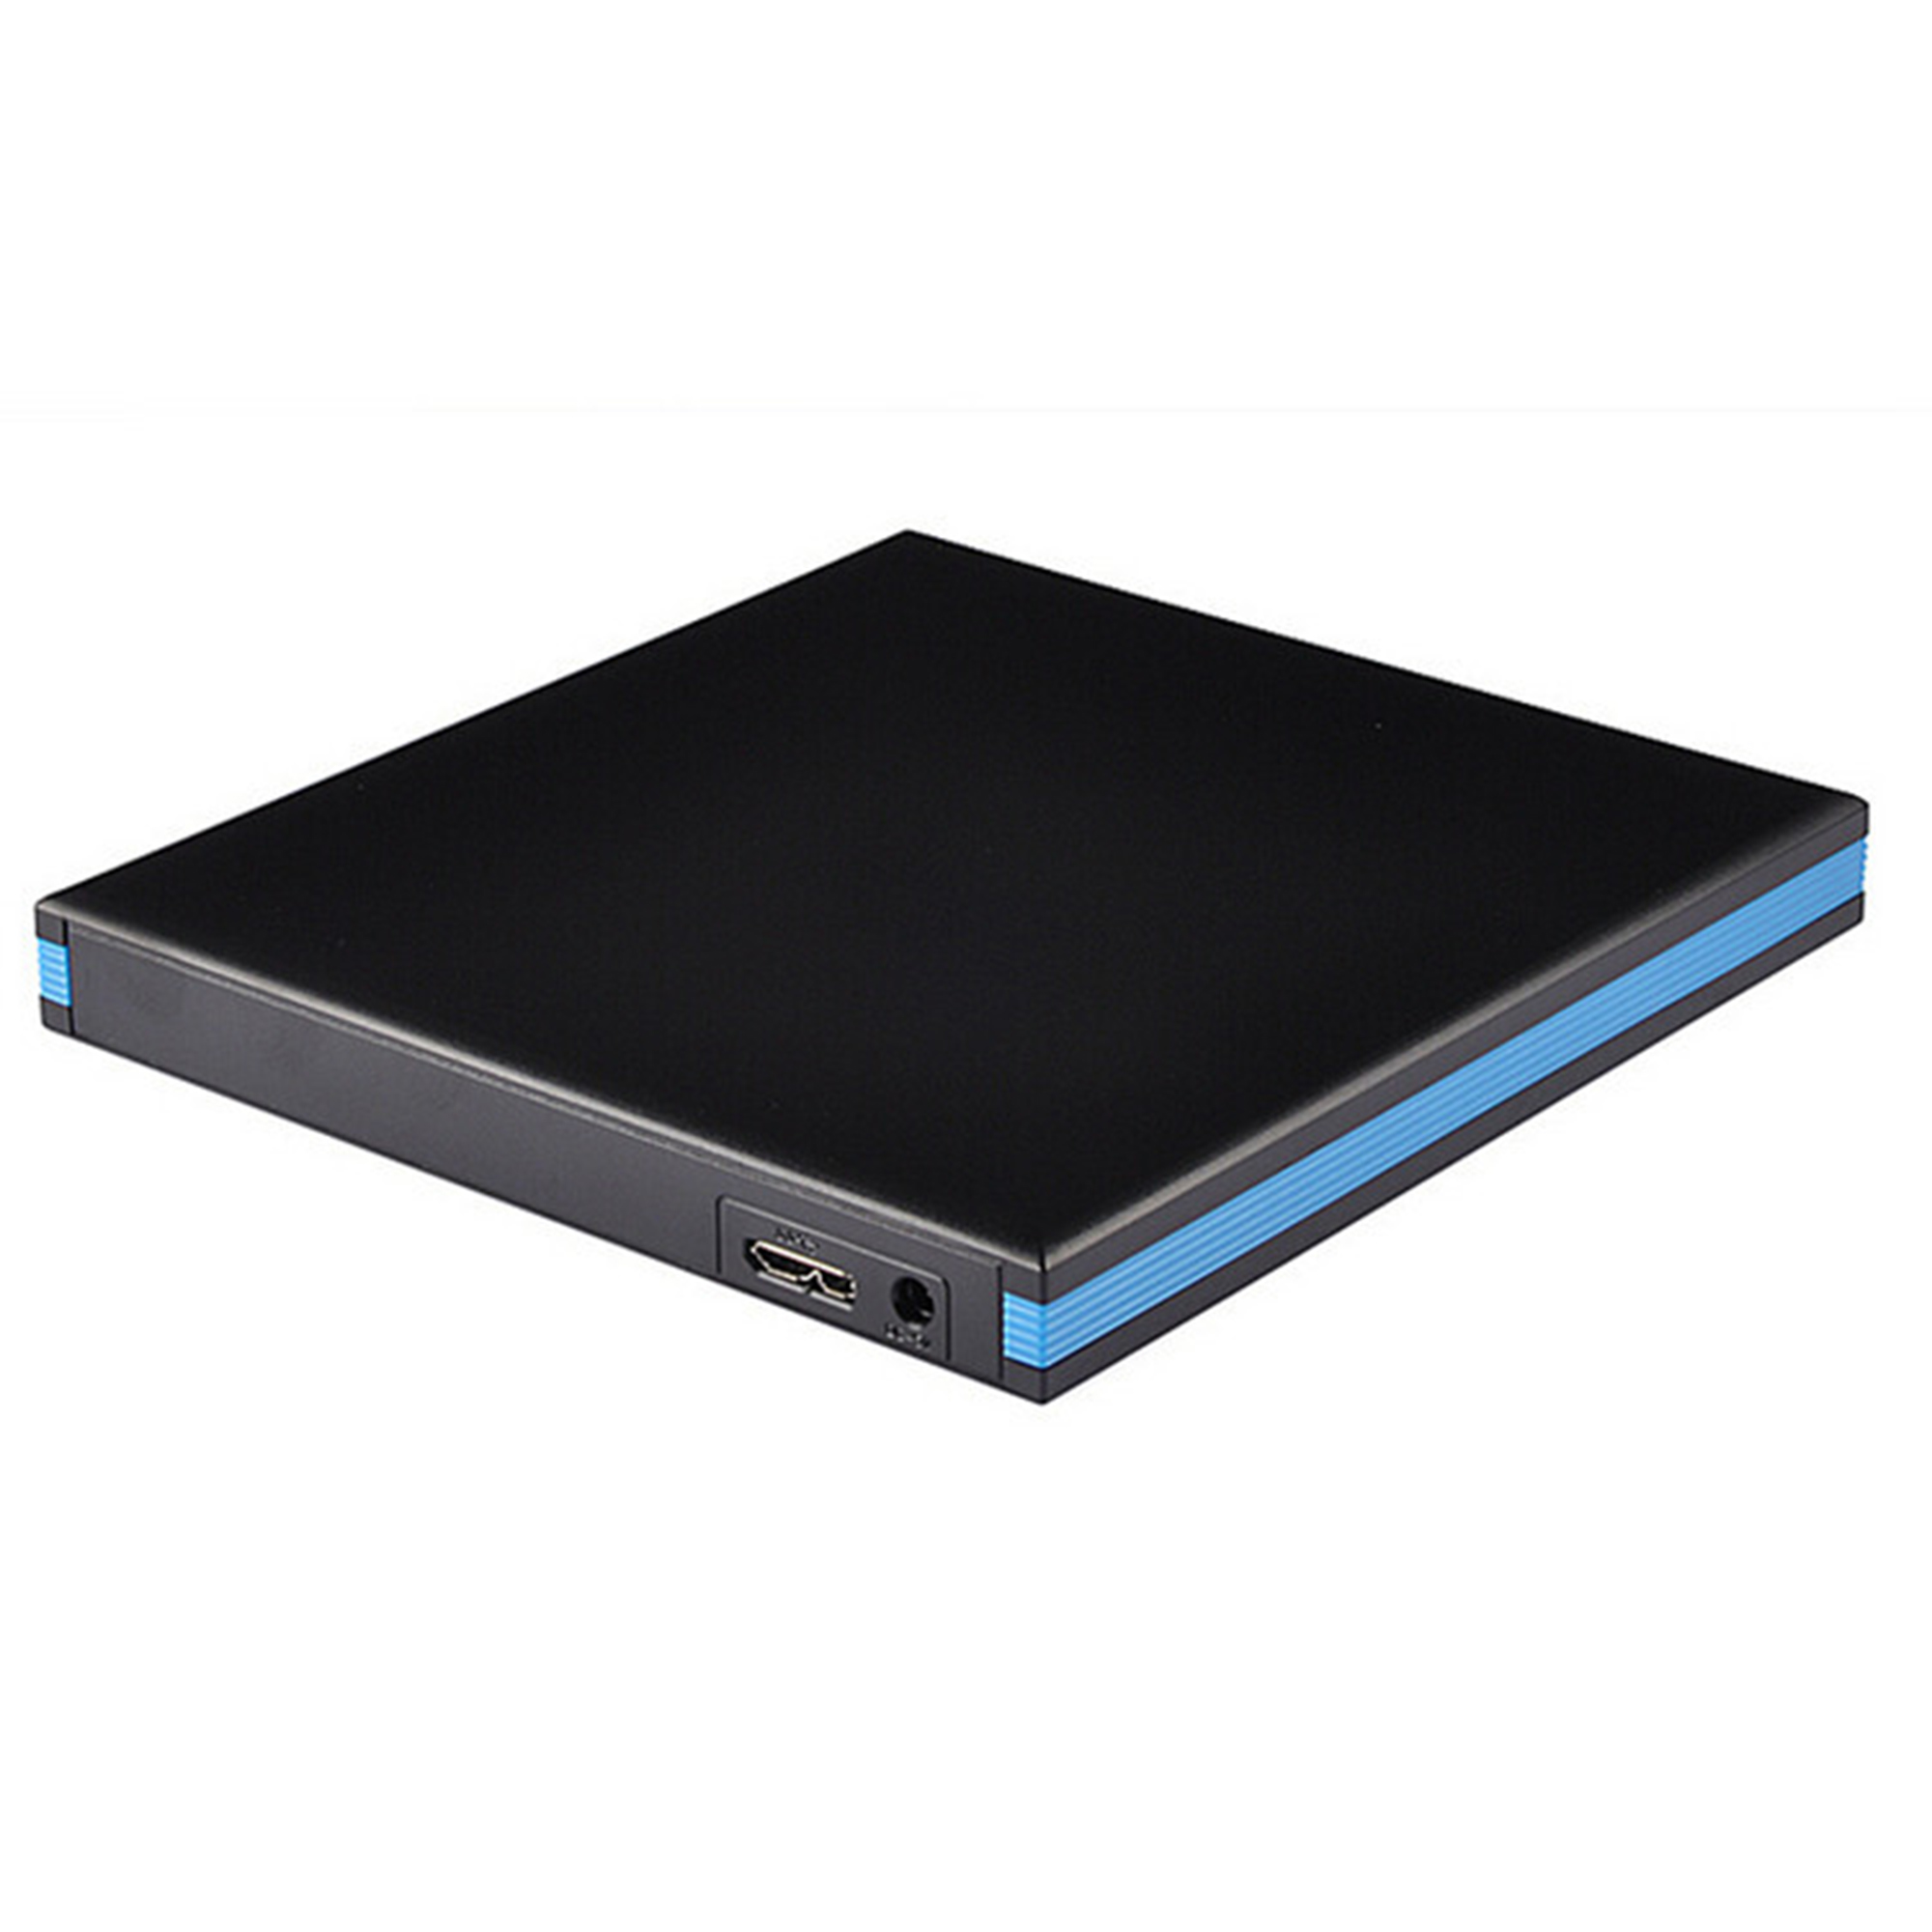 blu ray player for mac computer